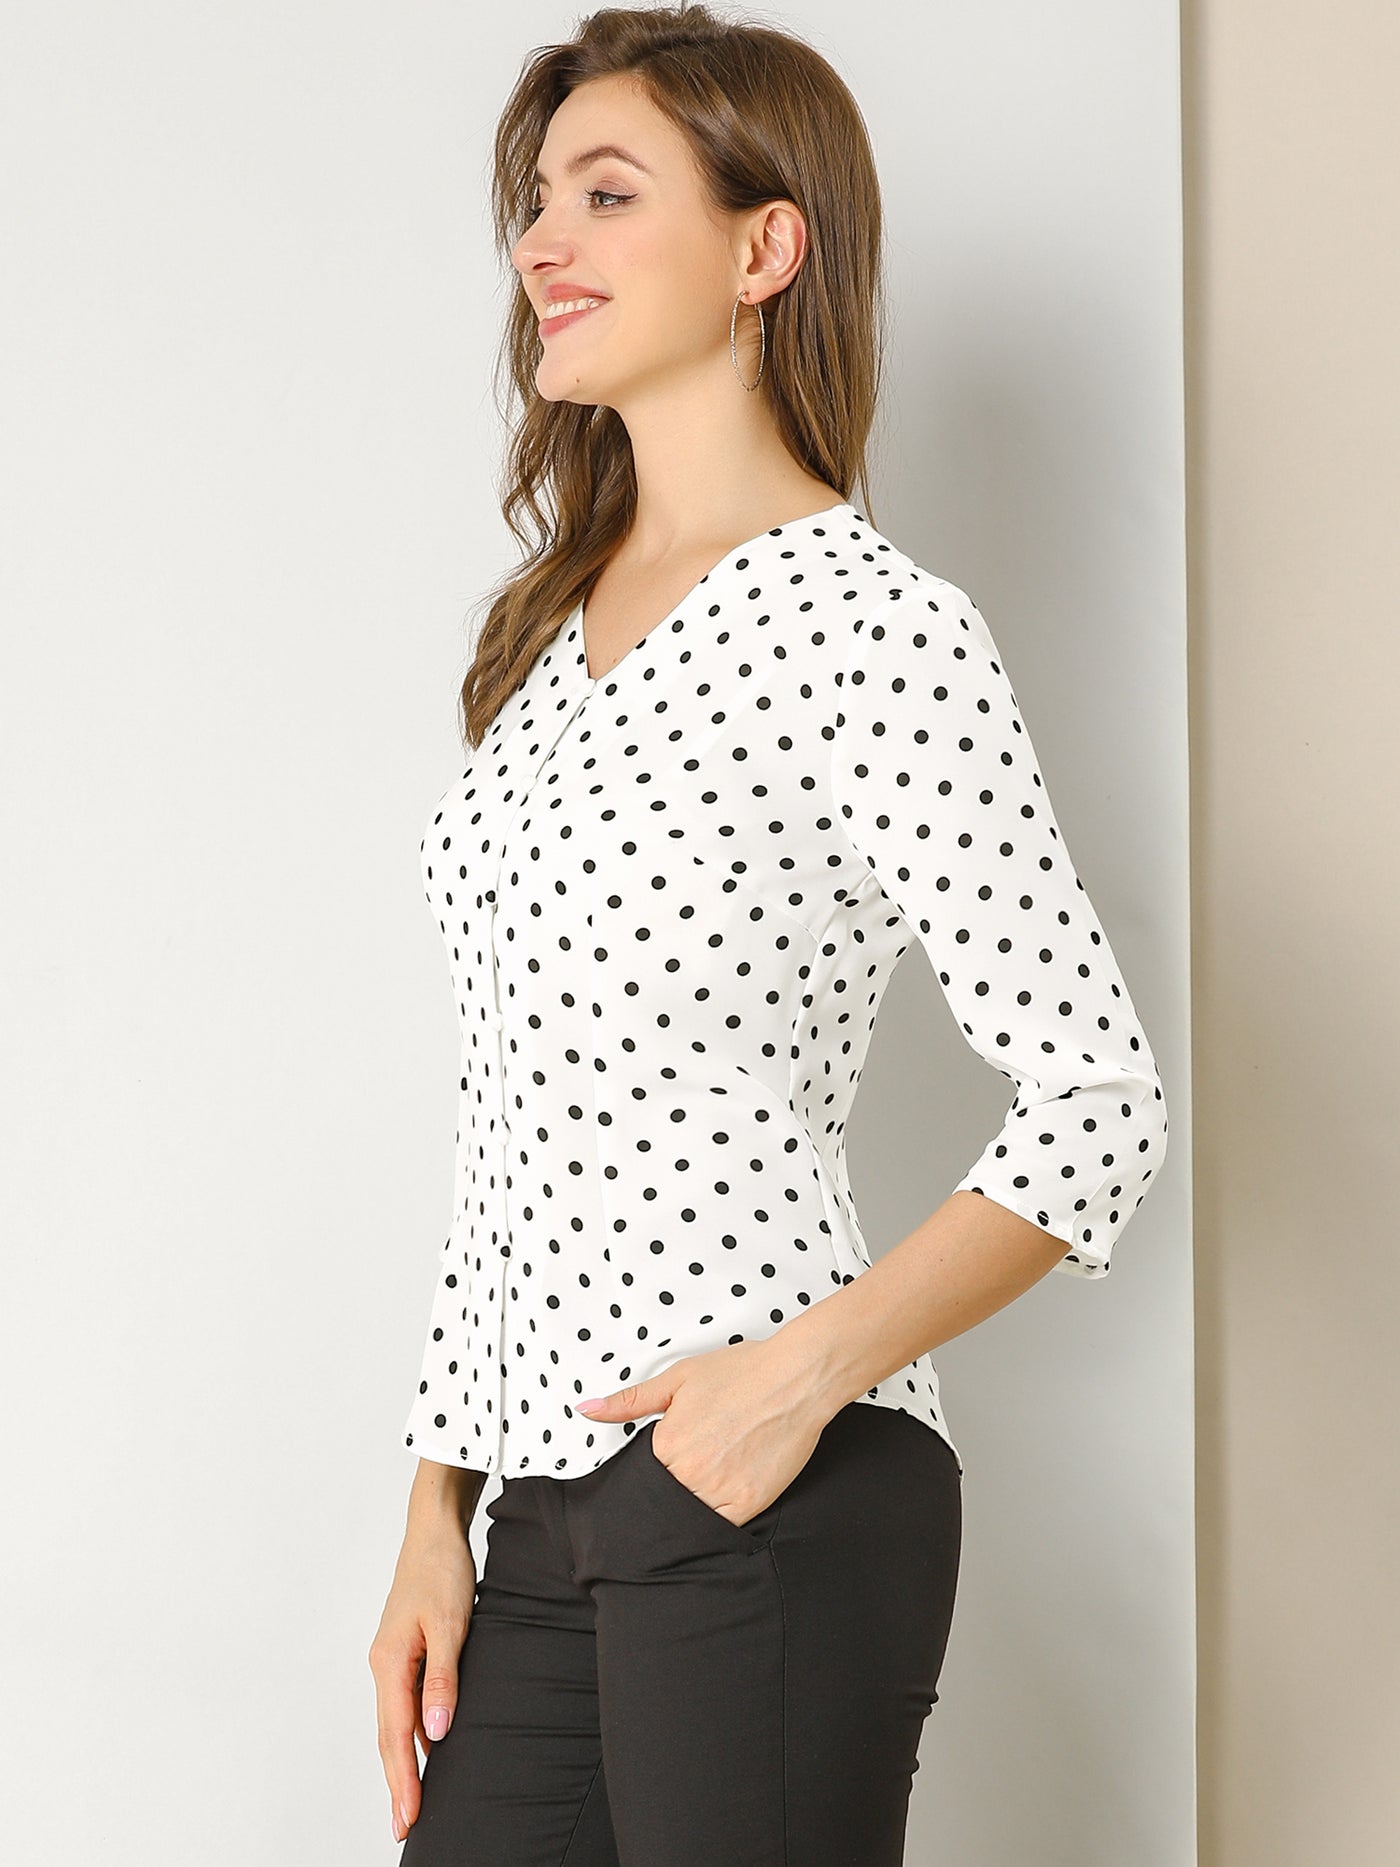 Allegra K Polka Dots 3/4 Sleeve Button Front Vintage Office Blouse Top